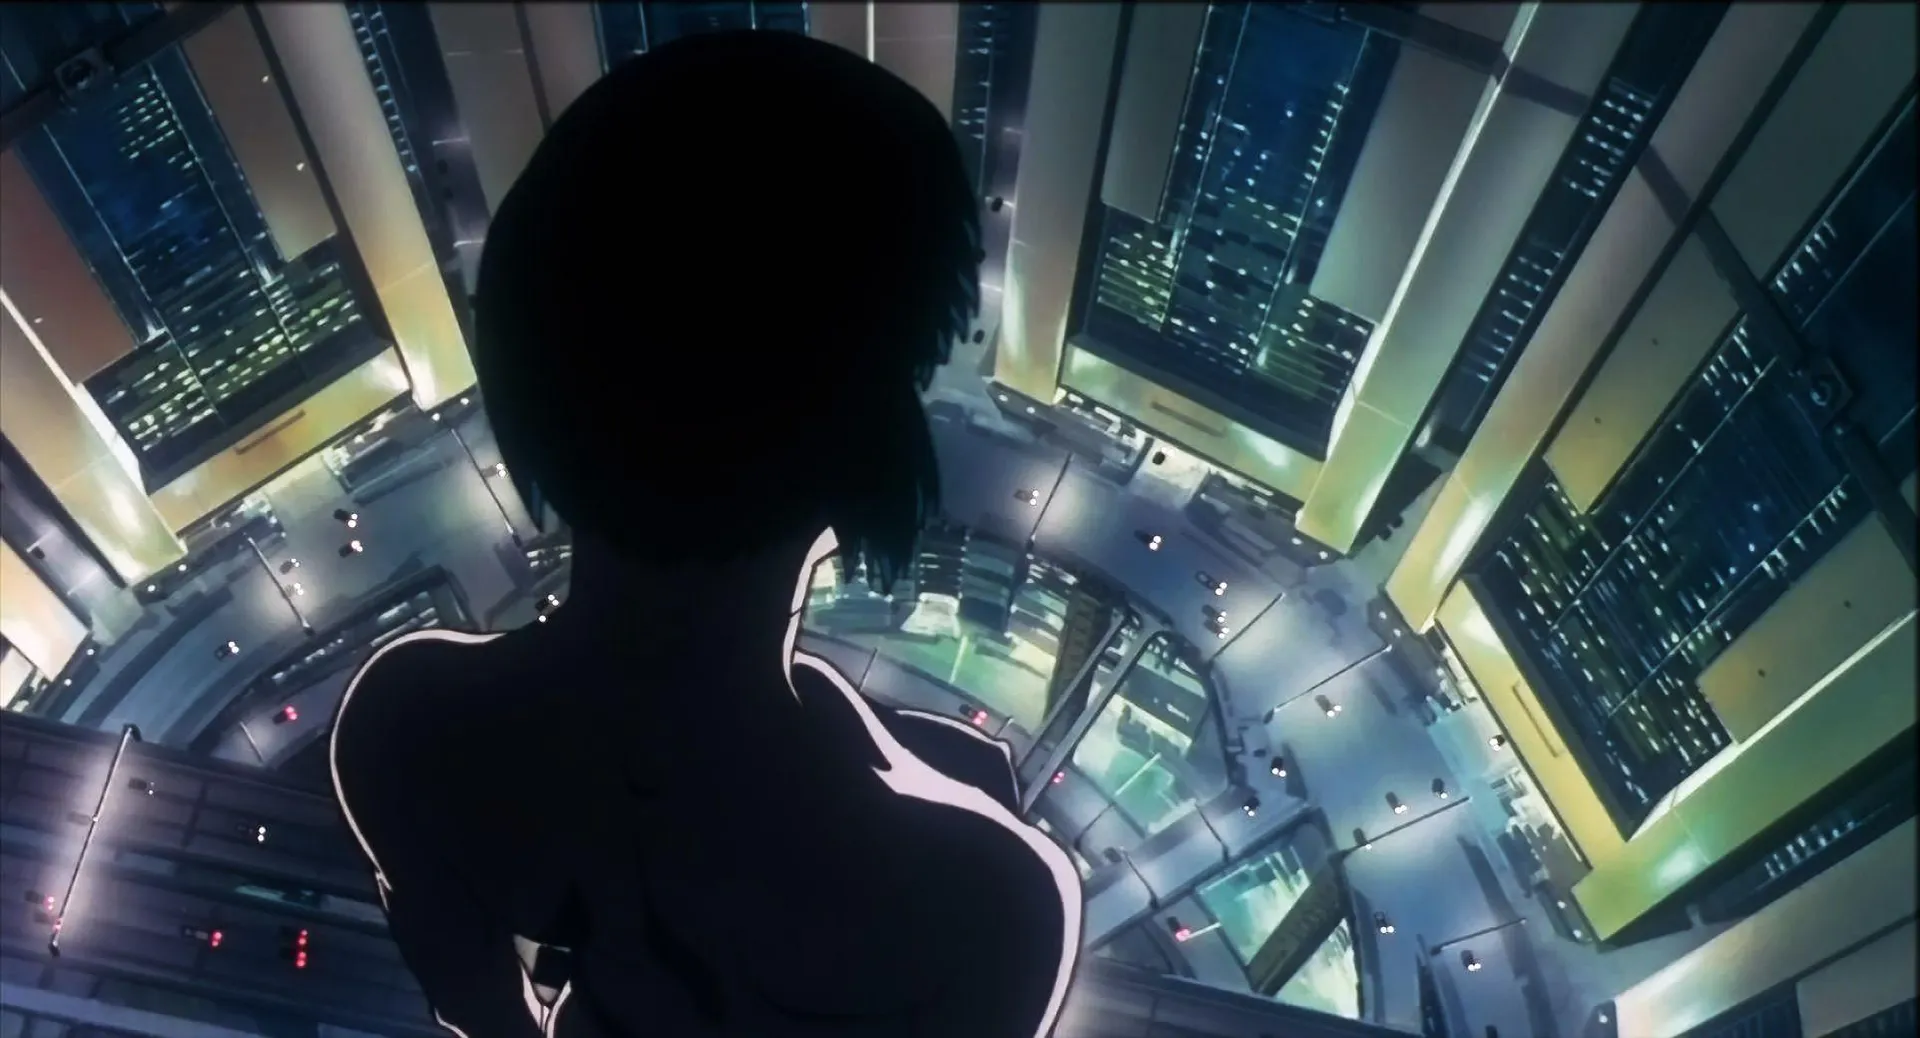 Ghost In The Shell Backgrounds